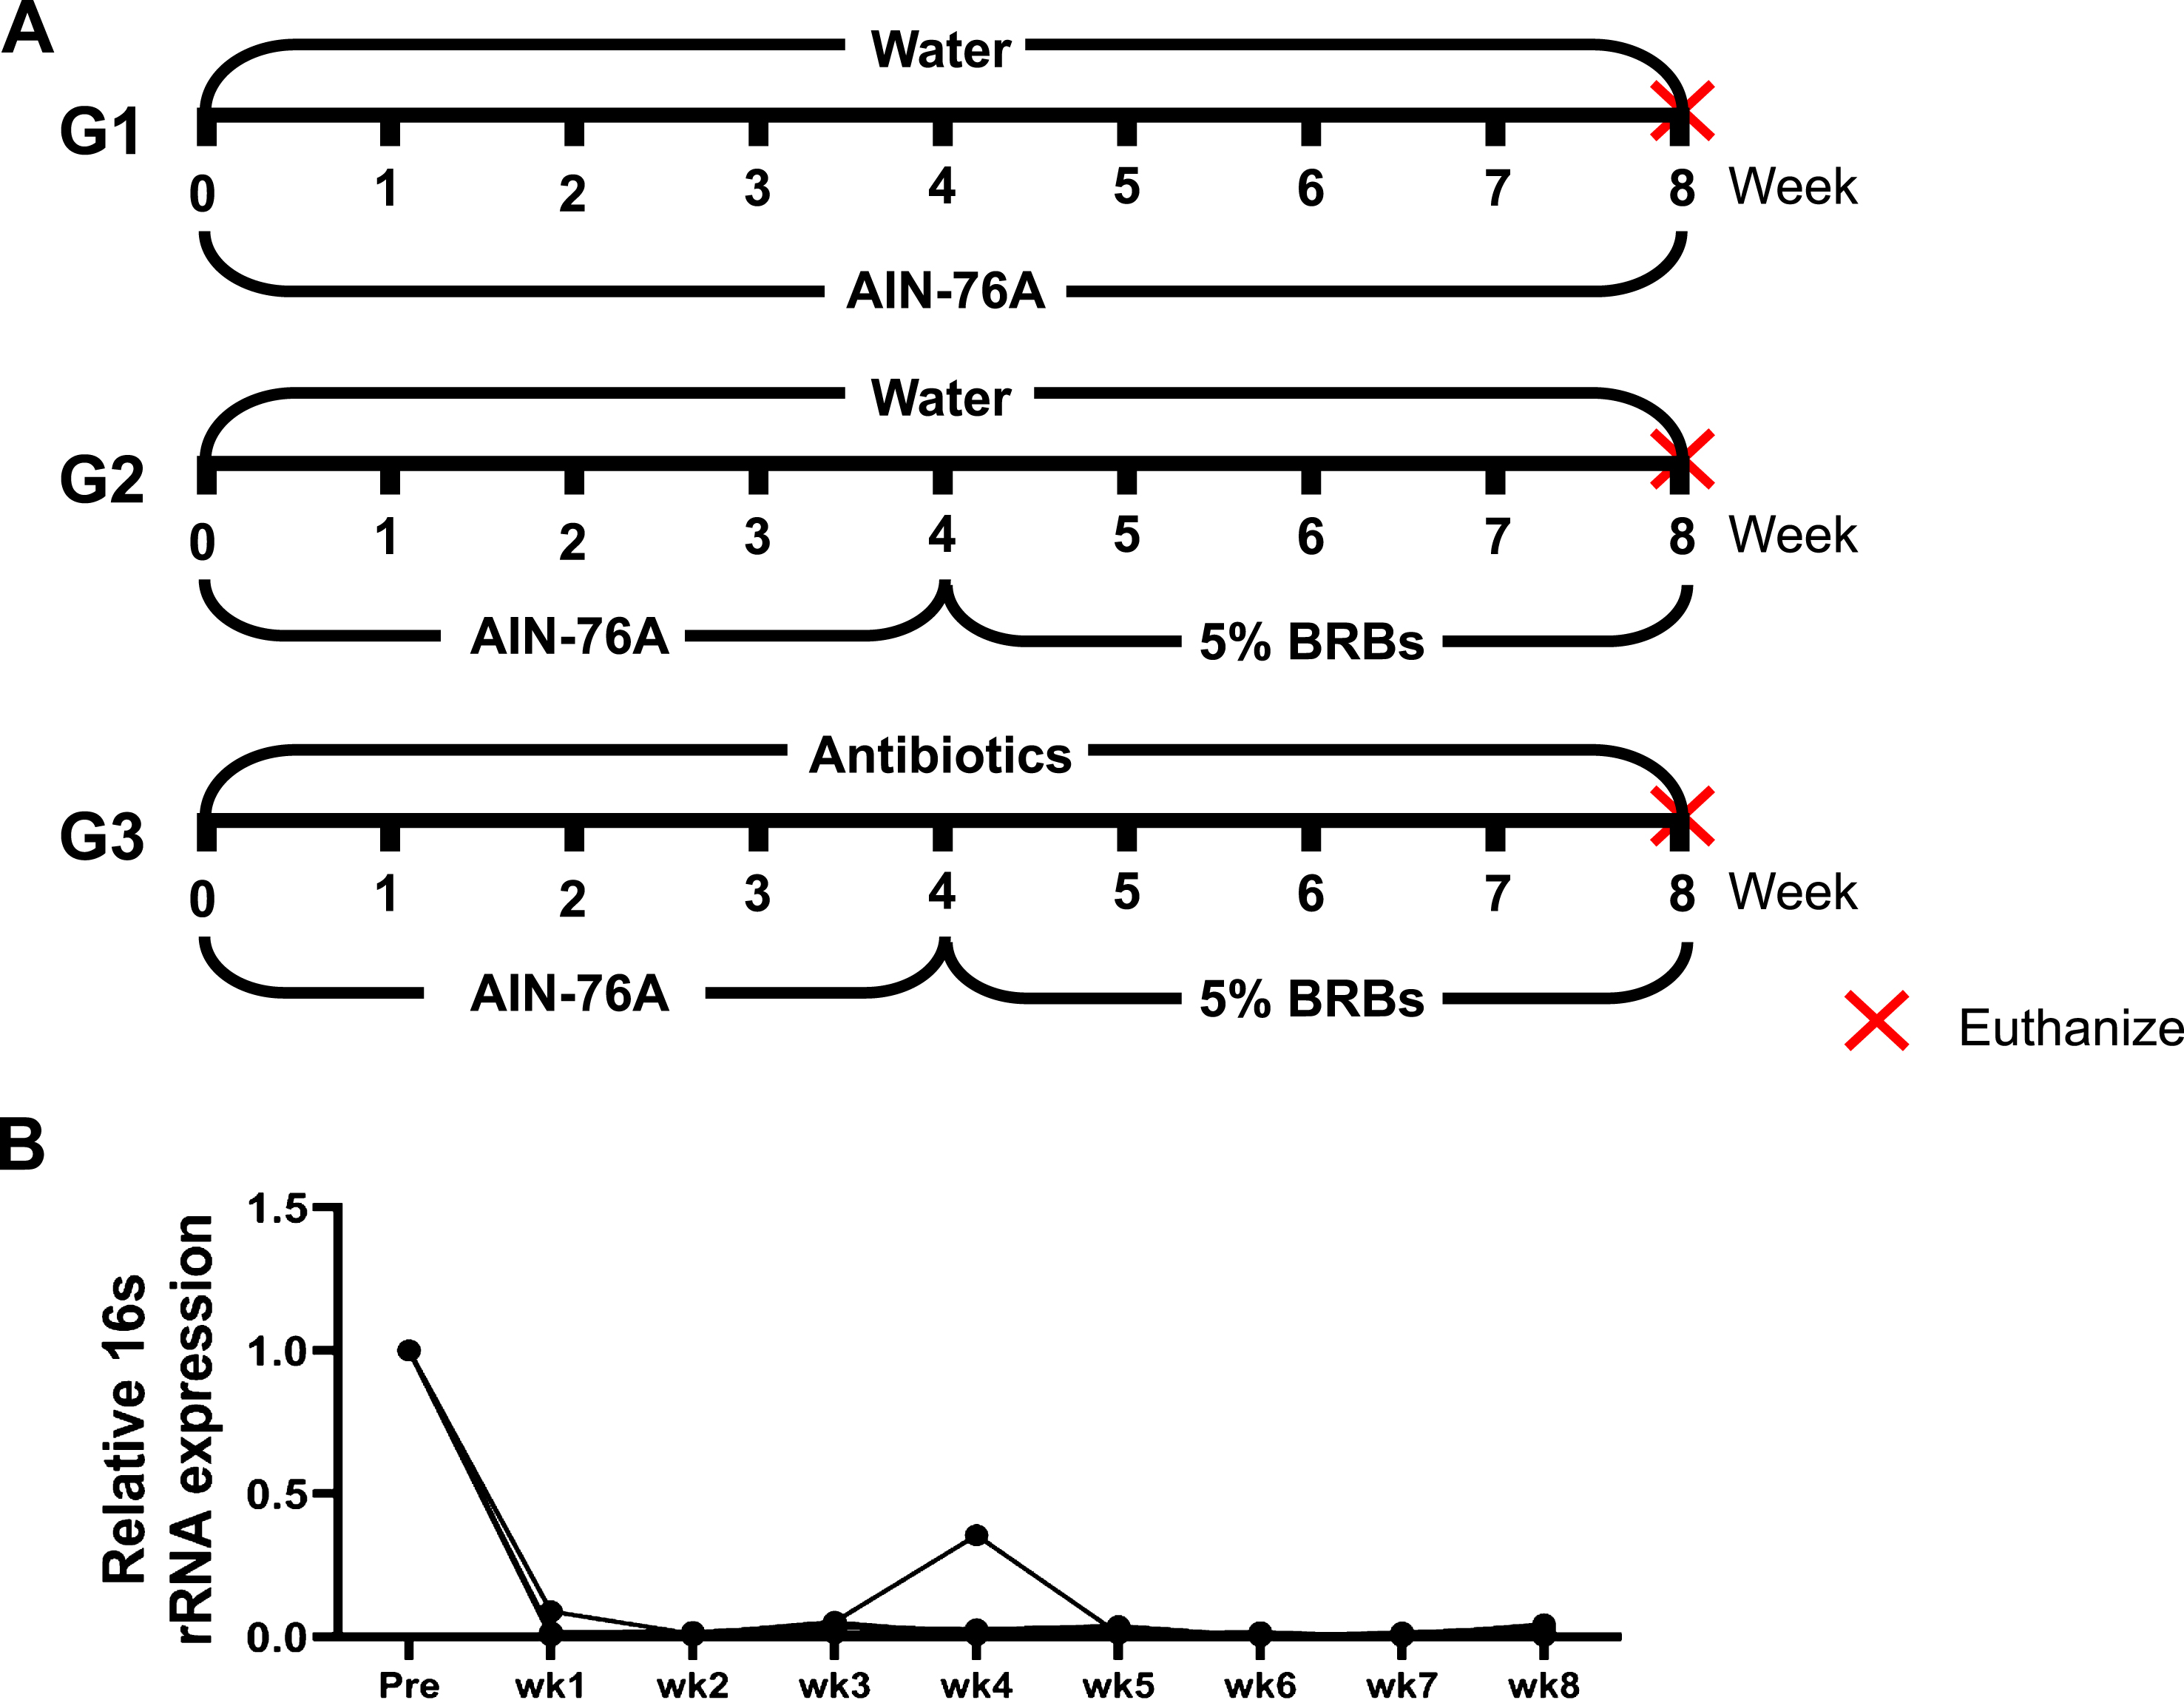 (A) Animal experimental protocol of the current study. ApcMin/+ mice were randomly assigned to three study groups. The mice in G1 were fed regular drinking water and the control diet for 8 weeks. The mice in G2 were fed regular drinking water and the control diet for 4 weeks, and then change to 5% BRBs for additional 4 weeks. The mice in G3 were first given the control diet and antibiotics (1 g/L ampicillin, 1 g/L neomycin, 1 g/L metronidazole, and 0.5 g/L vancomycin) in the drinking water for 4 weeks. For the next 4 weeks, they were fed 5% BRBs along with the antibiotic treatment. (B) Antibiotics in the drinking water substantially decreased gut bacterial populations in ApcMin/+ mice. wk: week.